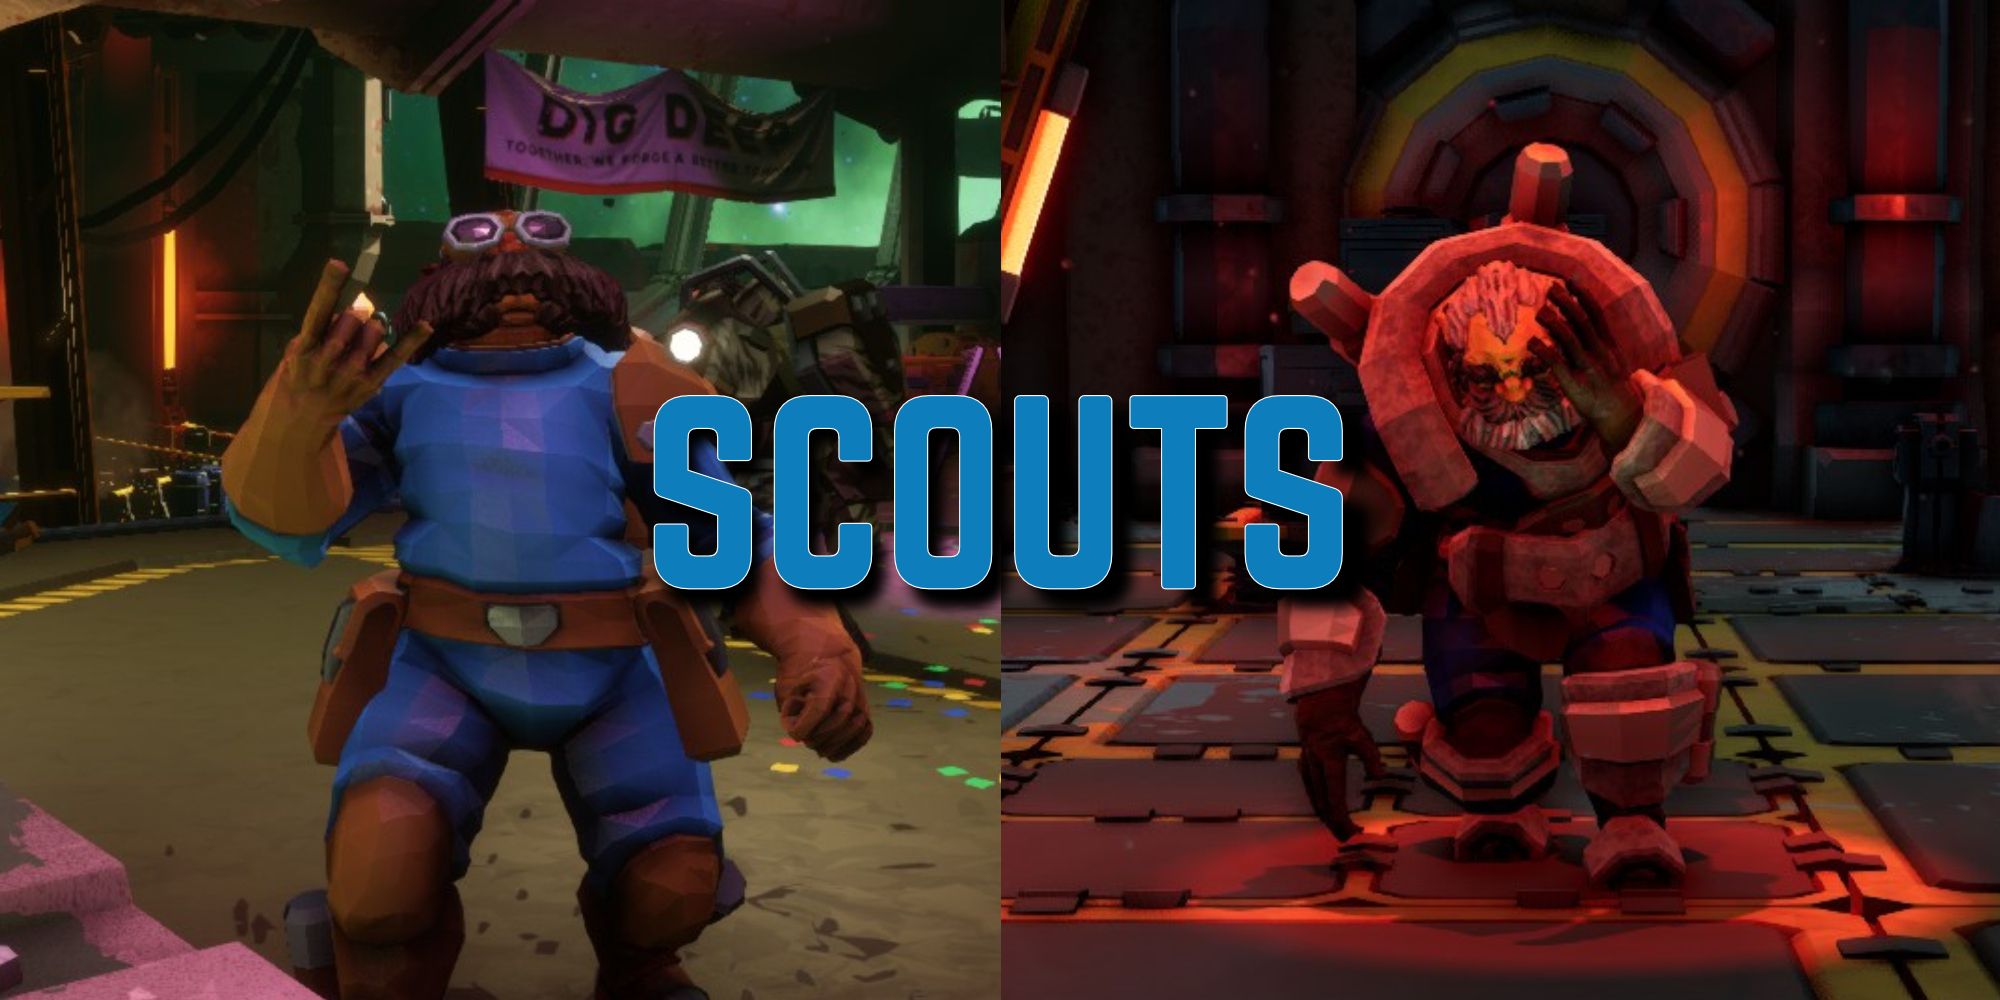 Deep Rock Galactic scout dancing and a scout injured in end screen